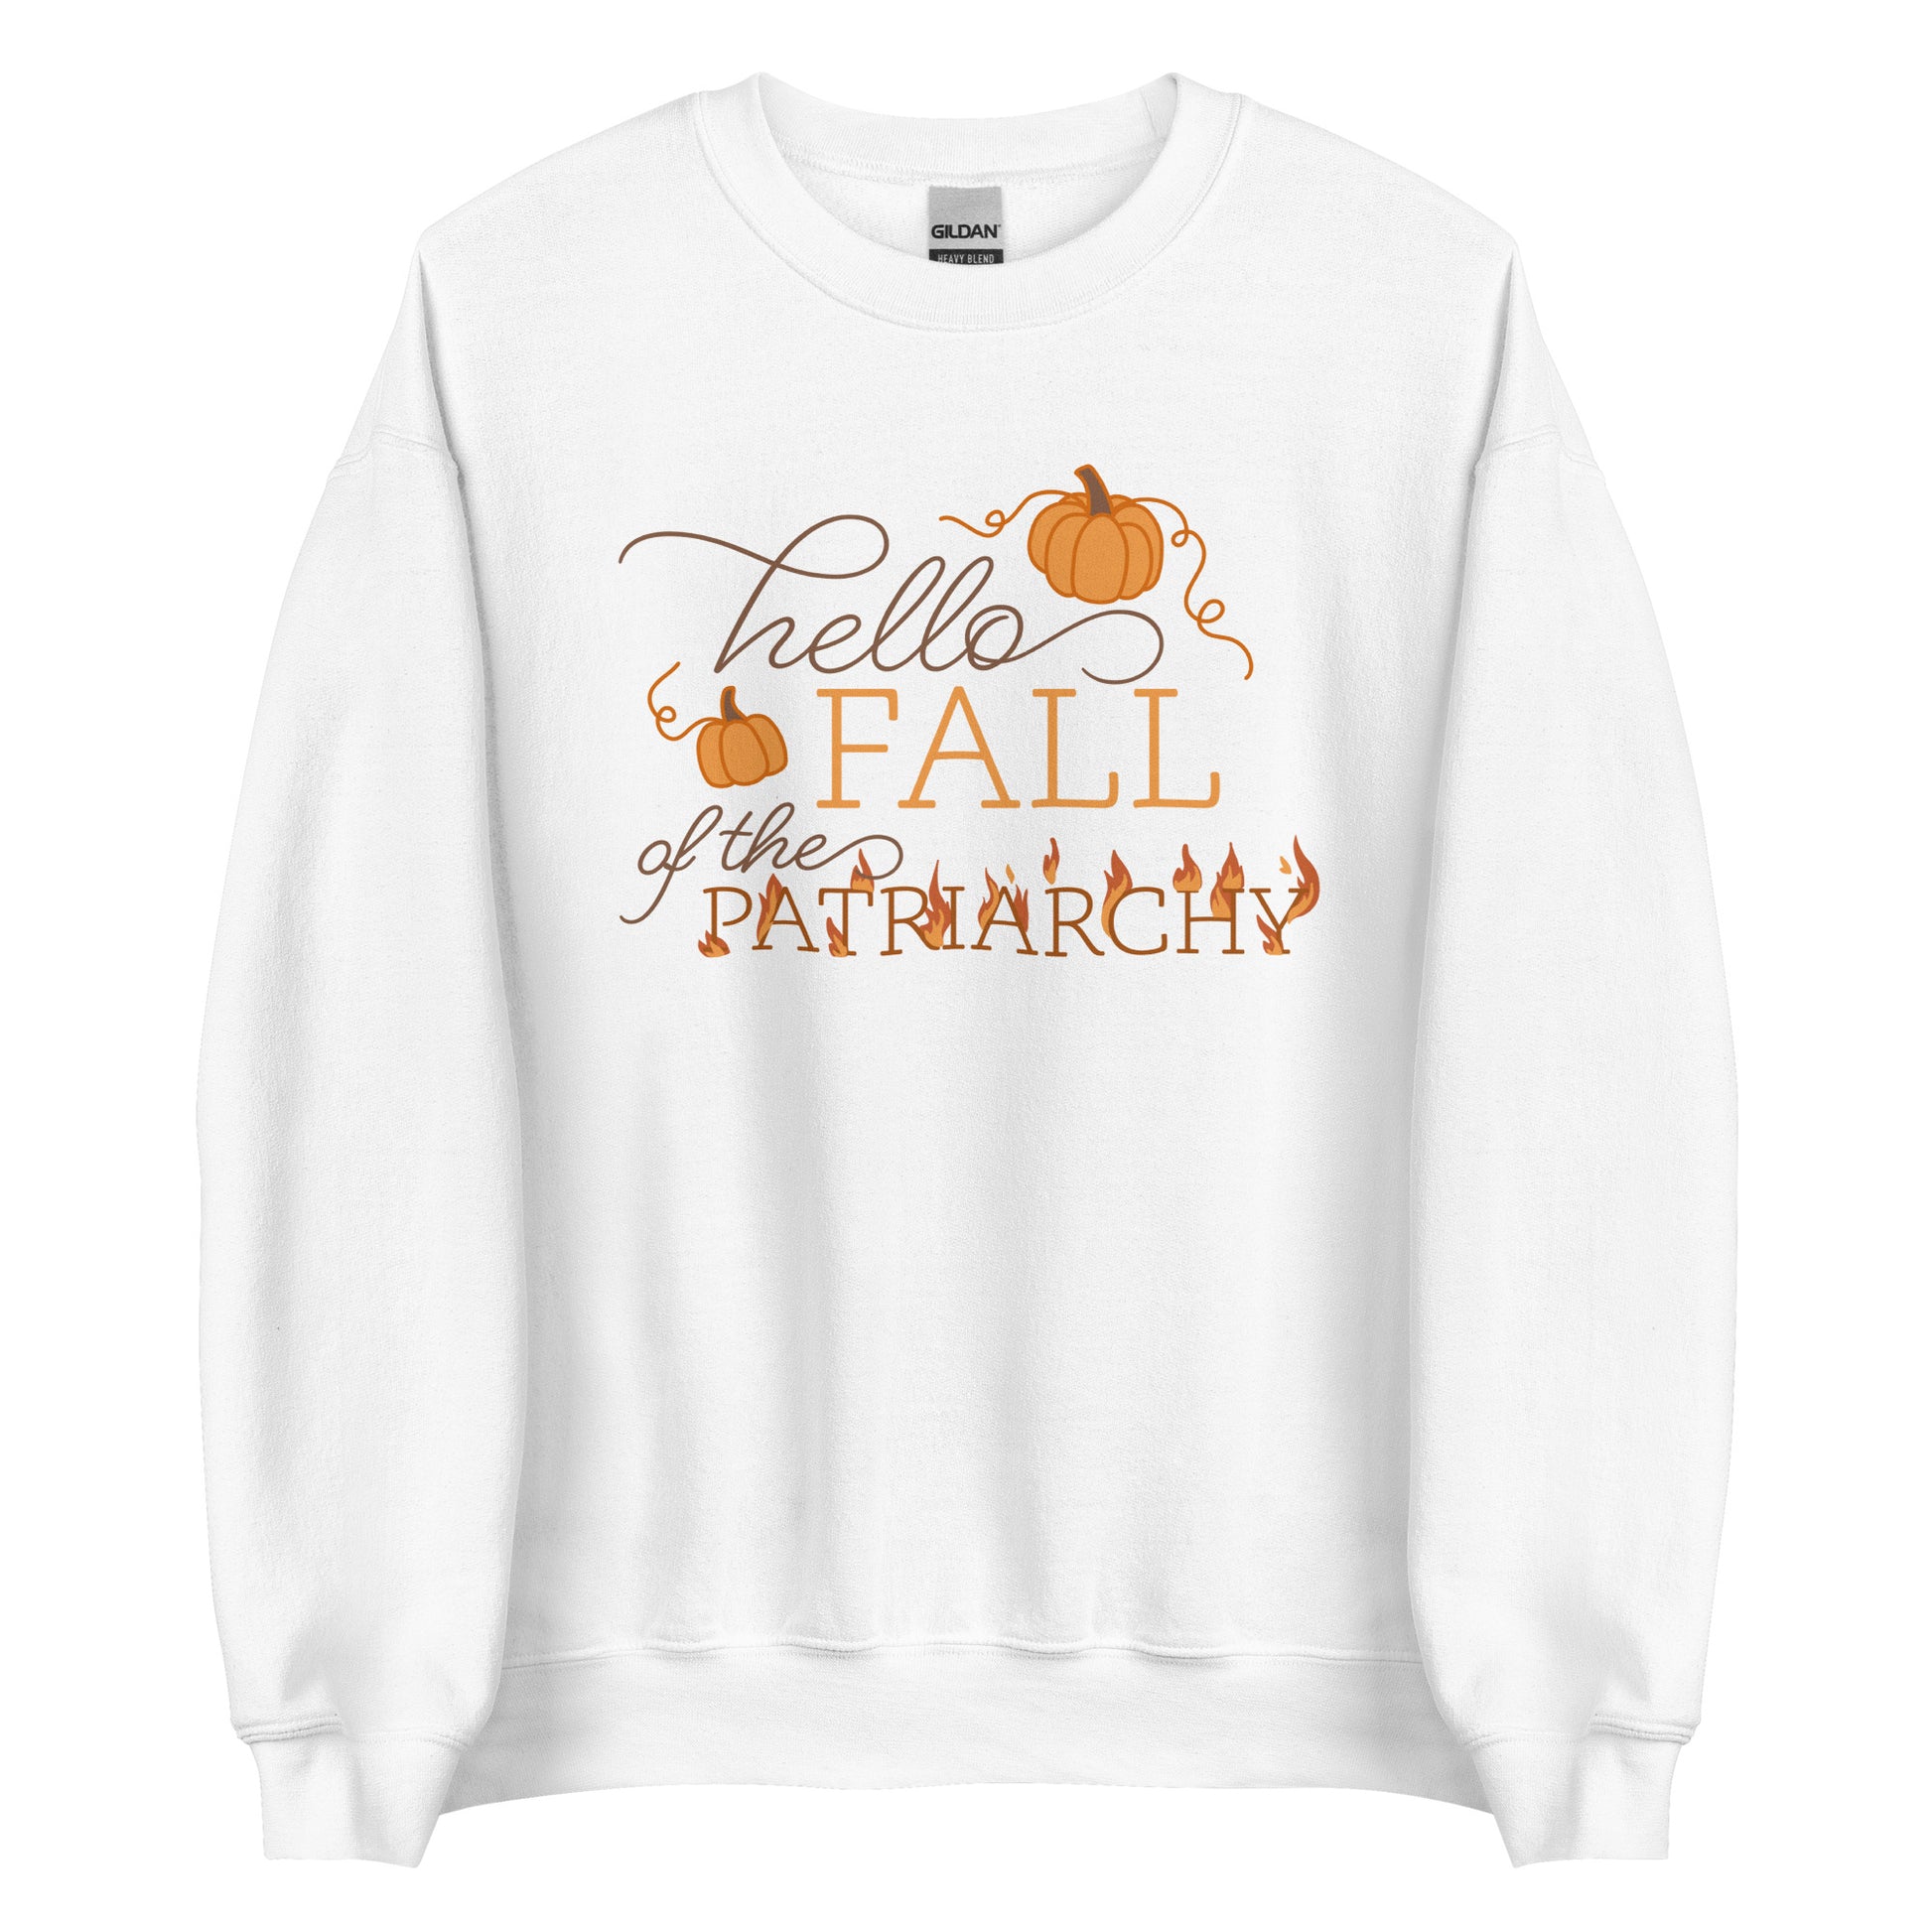 A white crewneck sweatshirt featuring text that reads "Hello fall of the patriarchy". Pumpkins surround the first half of the text and the word "patriarchy" is on fire.